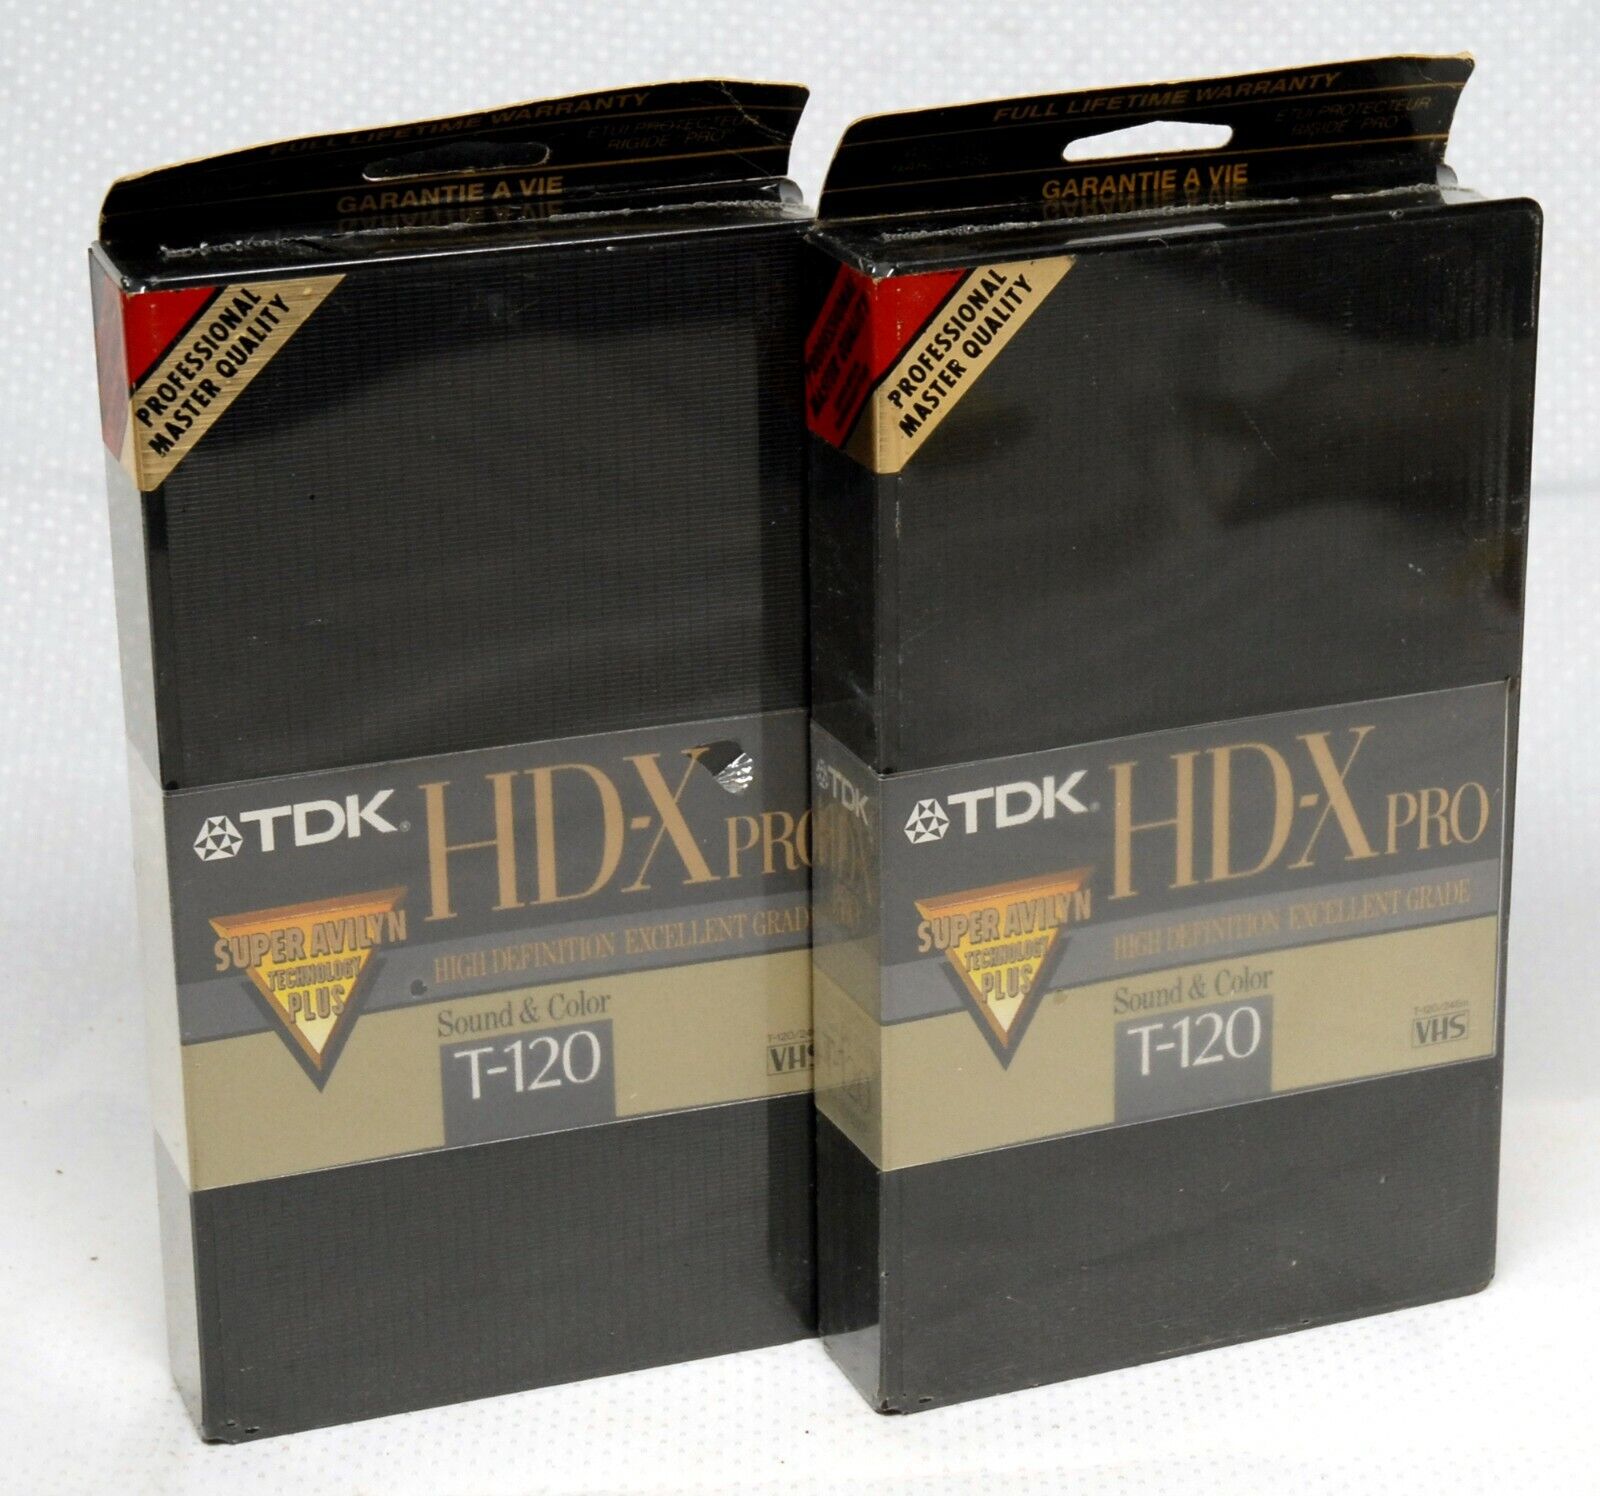 TDK HD-X Pro T-120 Quantity 2 SEALED Professional Grade Blank VHS Video Tapes